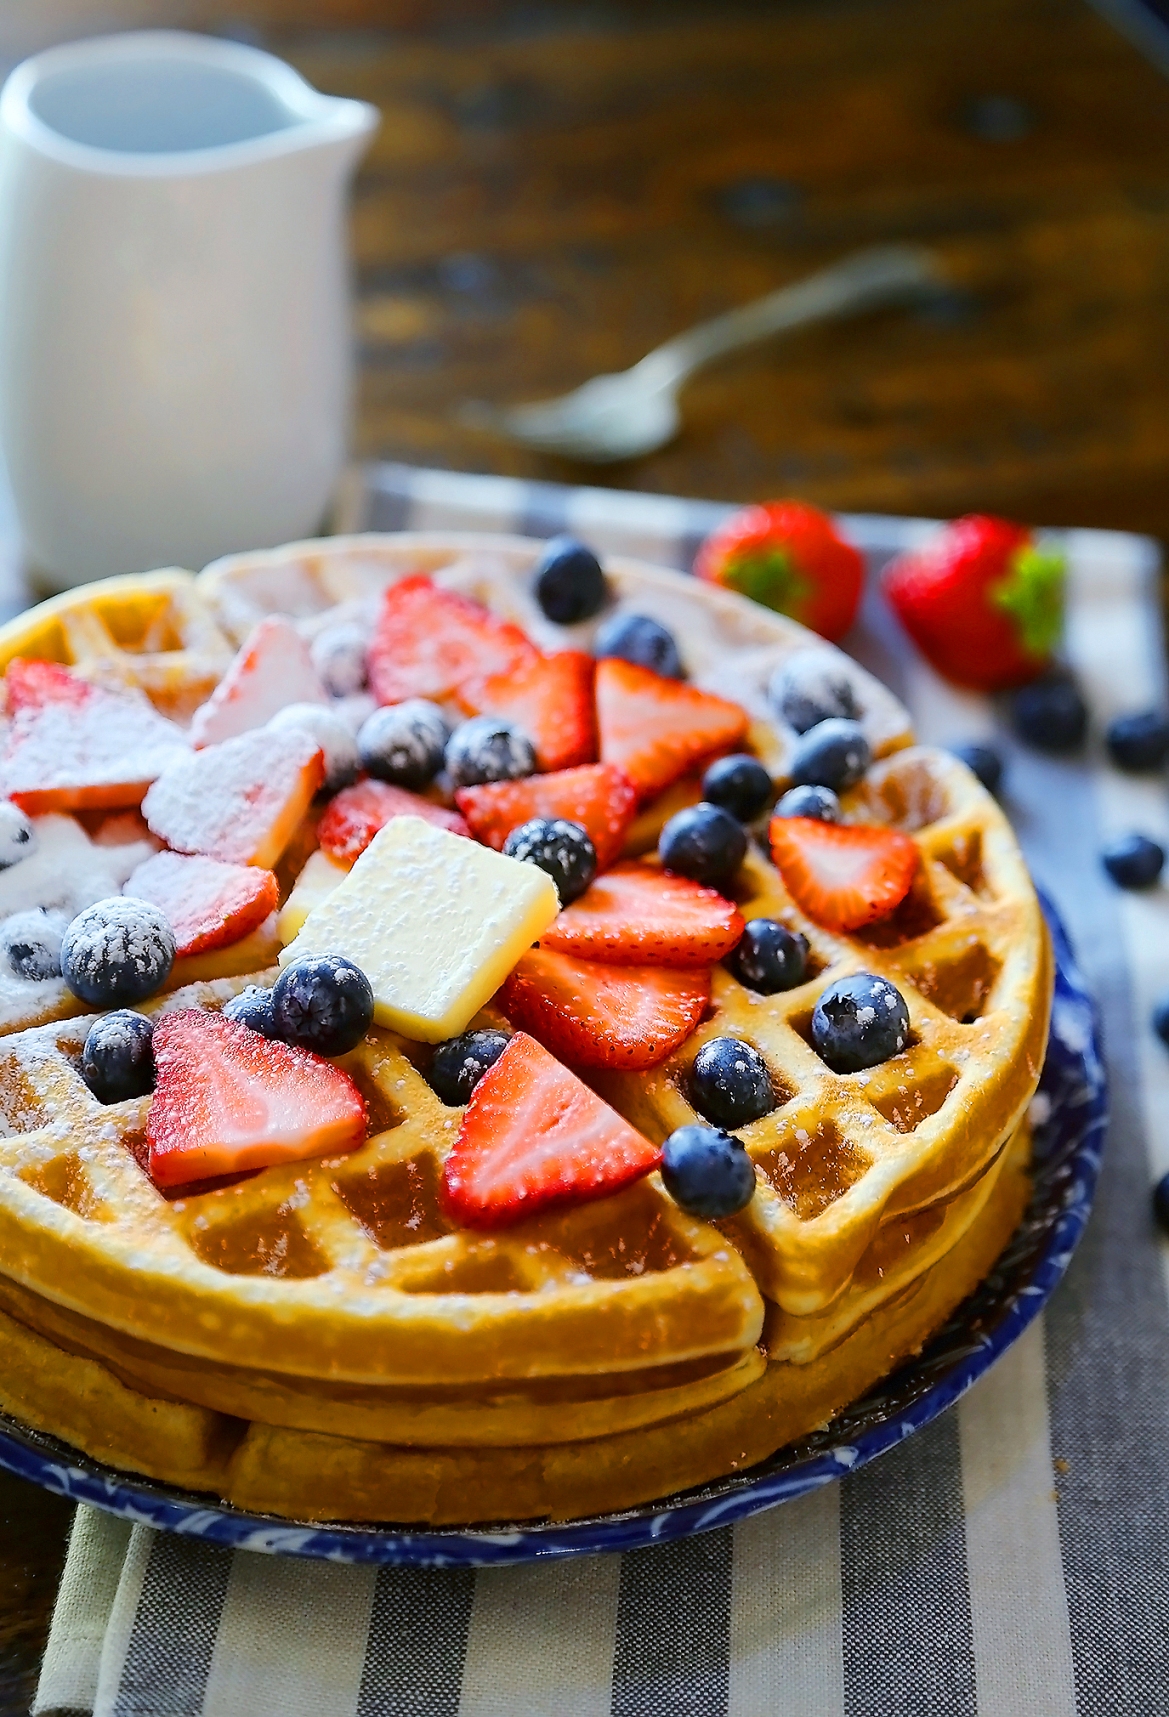 Fluffy Belgian Waffles - The BEST soft-yet-crisp, thick Belgian waffles made easy at home. thecomfortofcooking.com